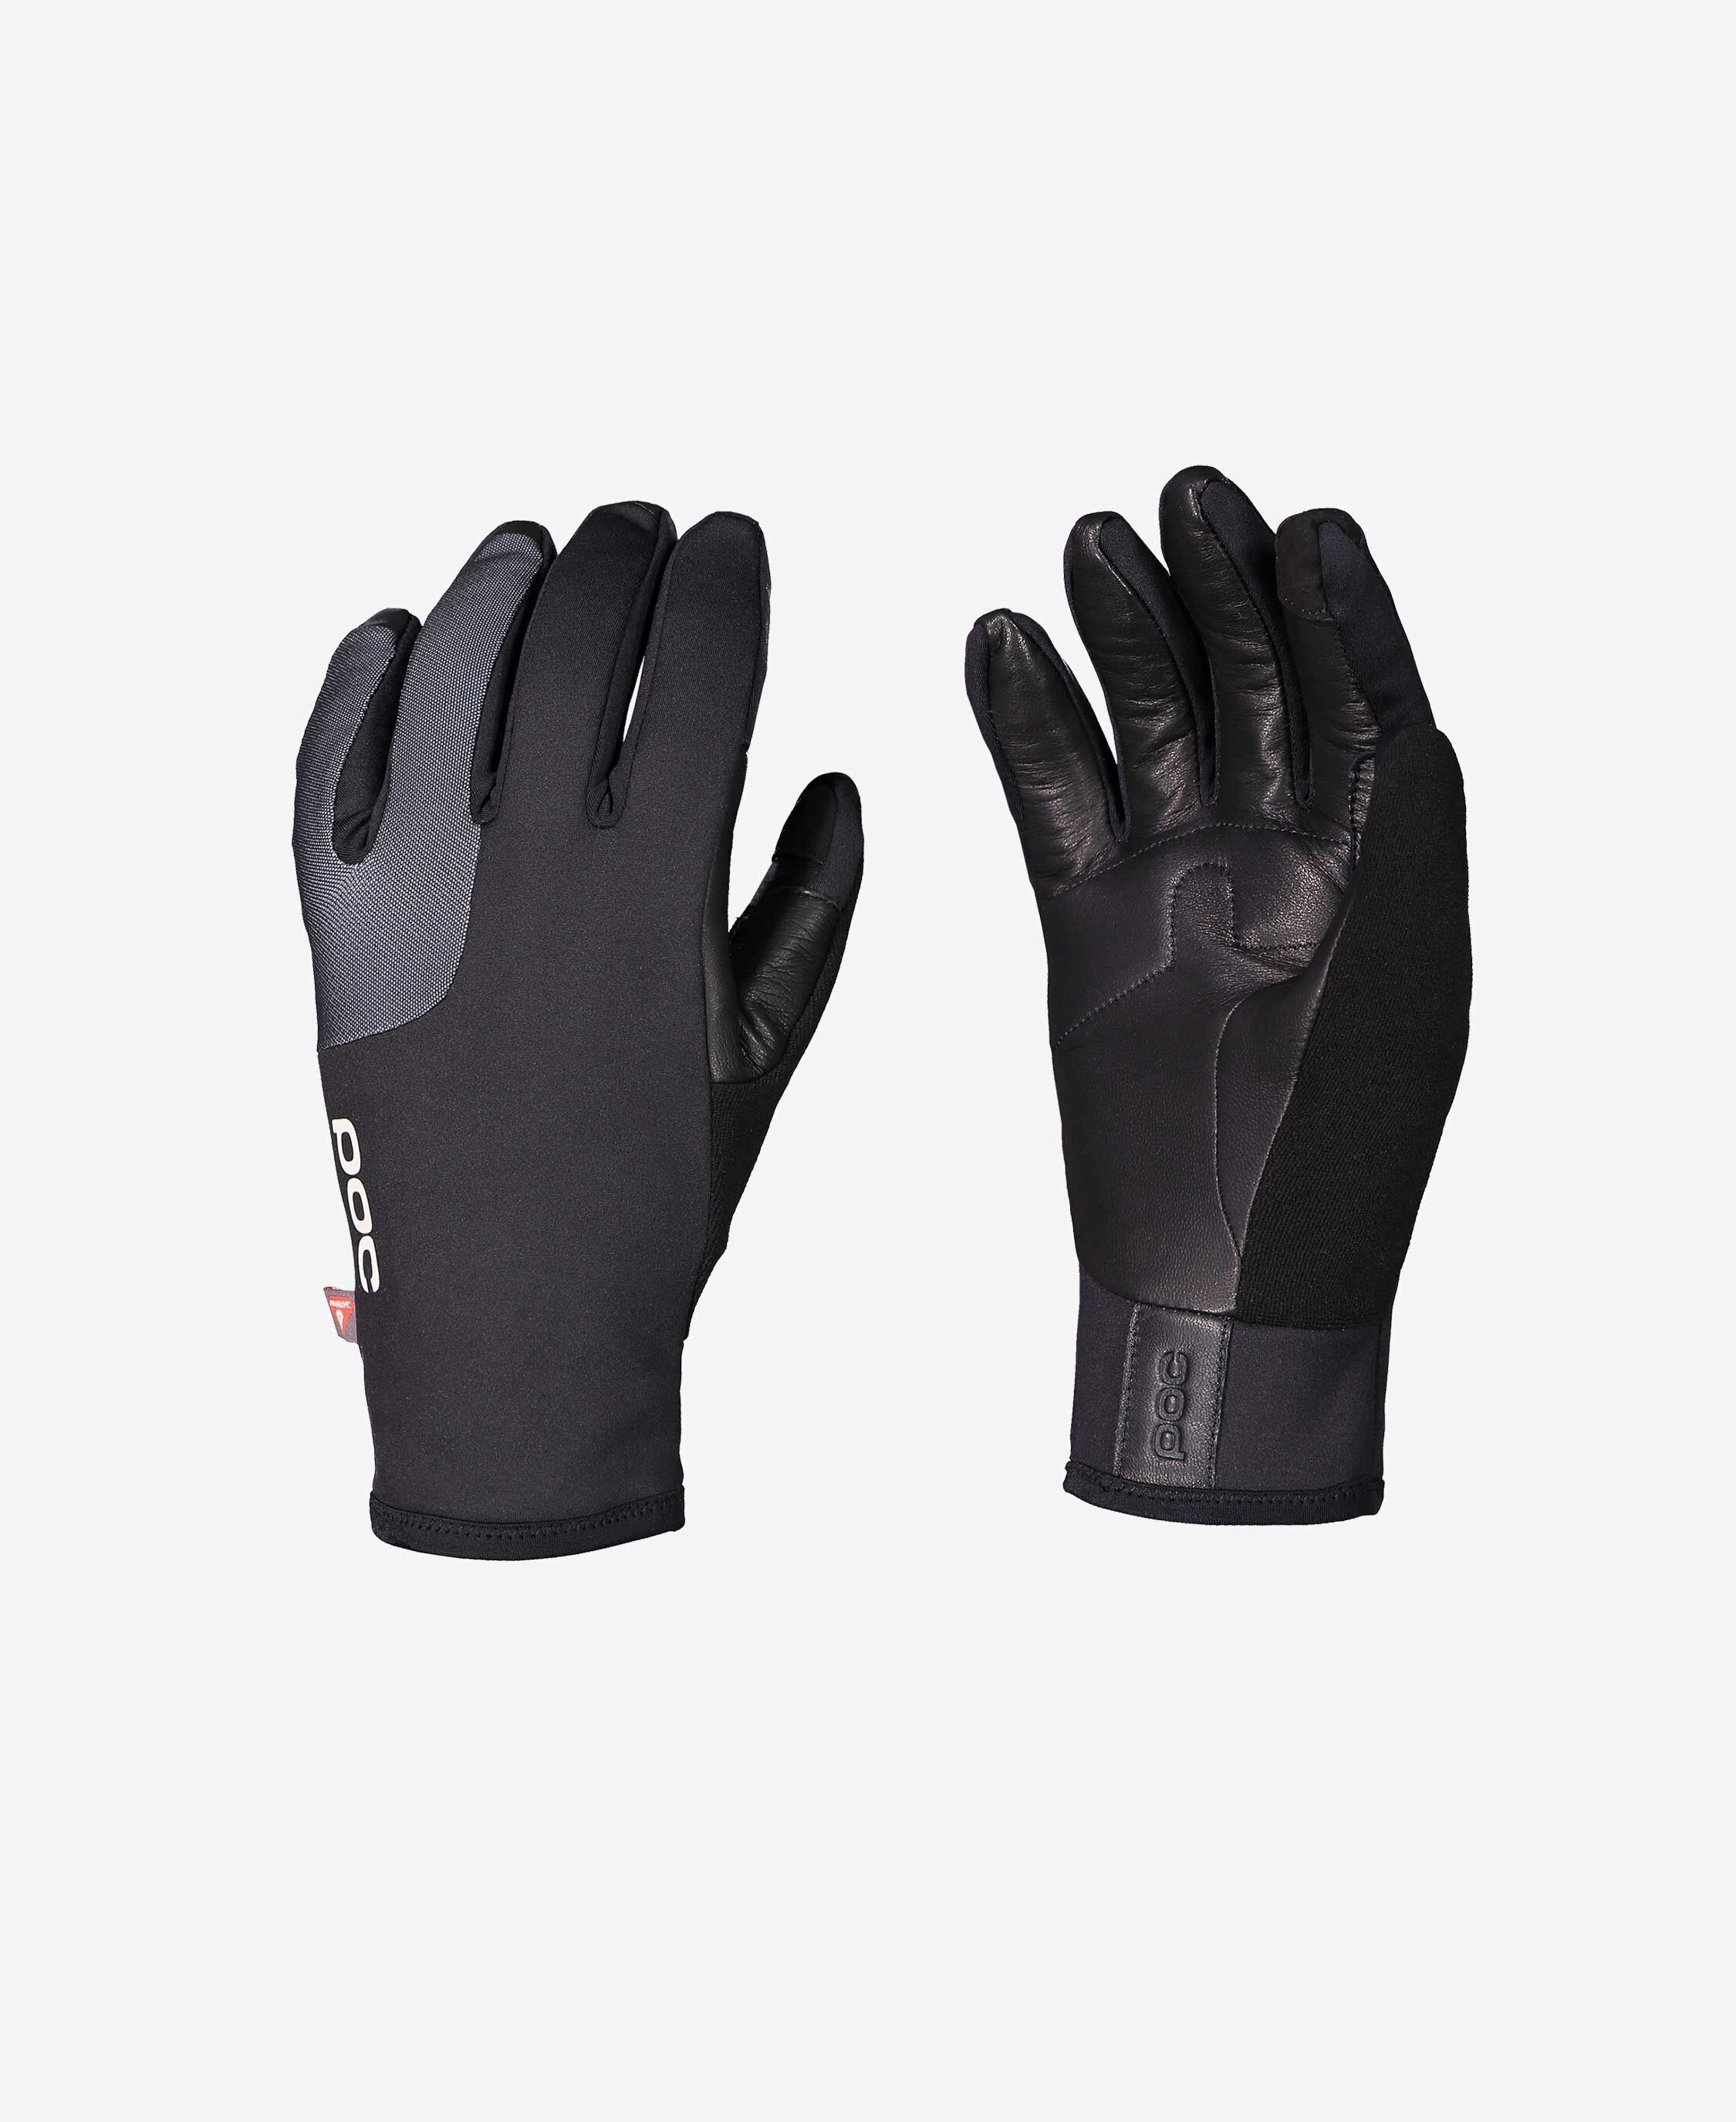 Poc Thermal Glove - Cycling gloves